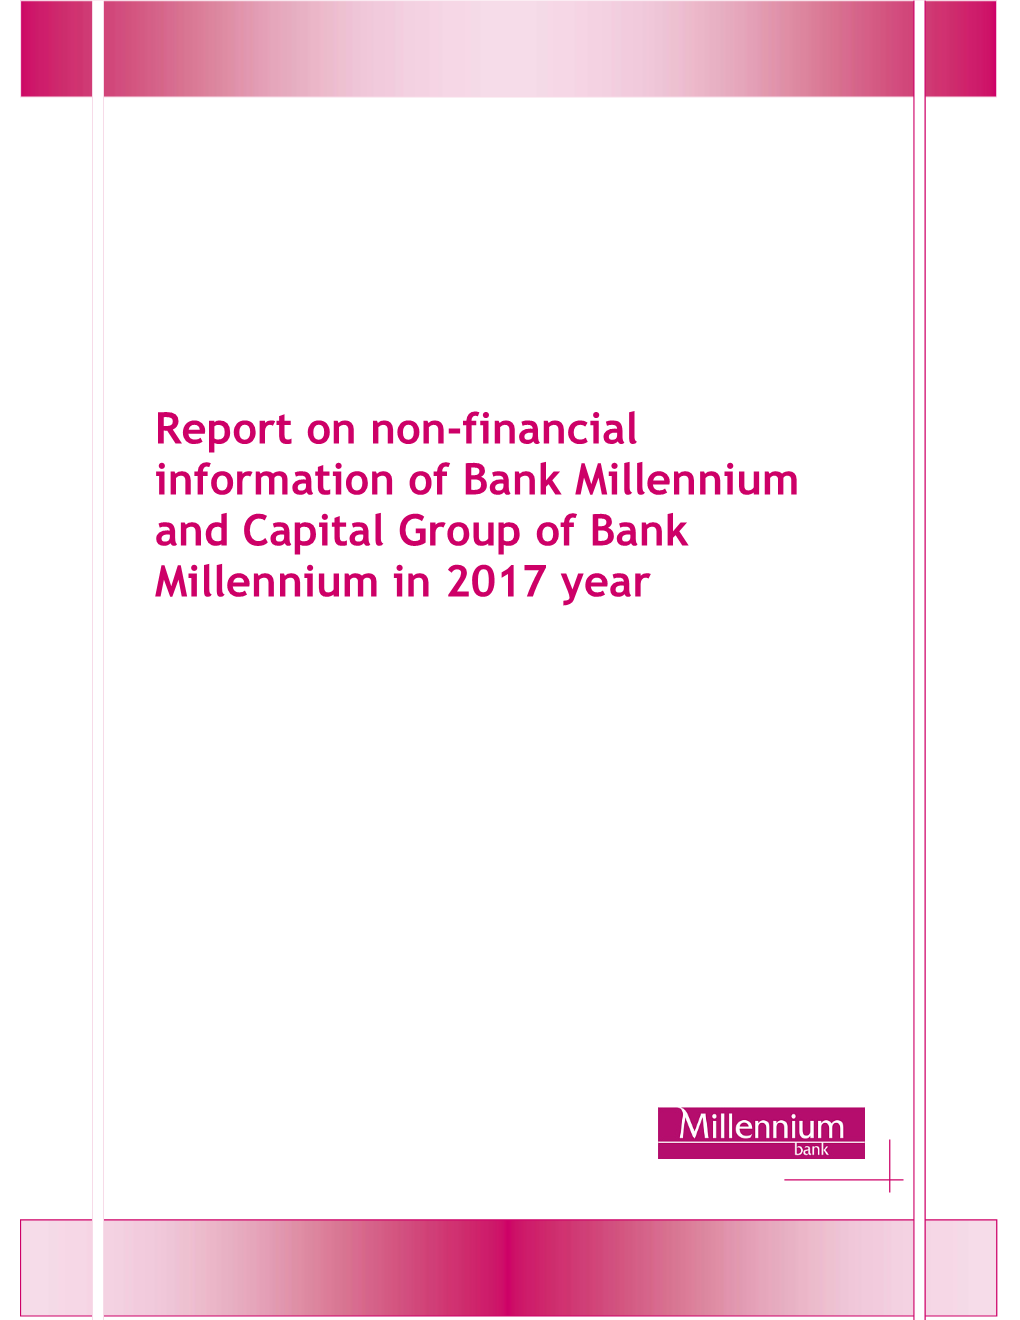 Report on Non-Financial Information of Bank Millennium and Capital Group of Bank Millennium in 2017 Year